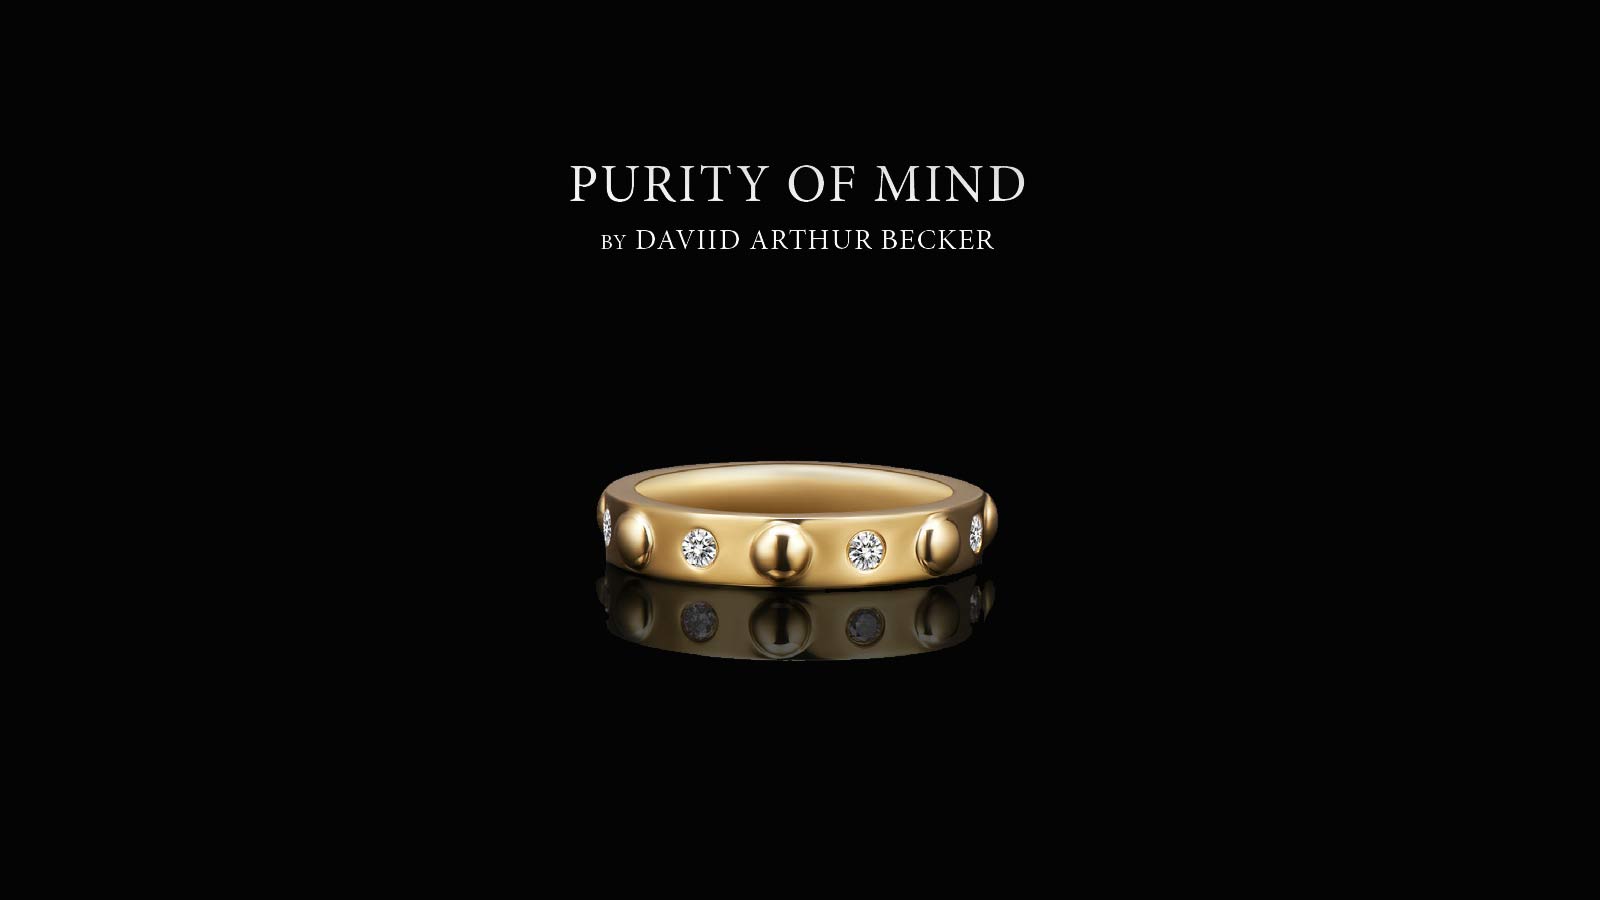 id=PURITY OF MIND